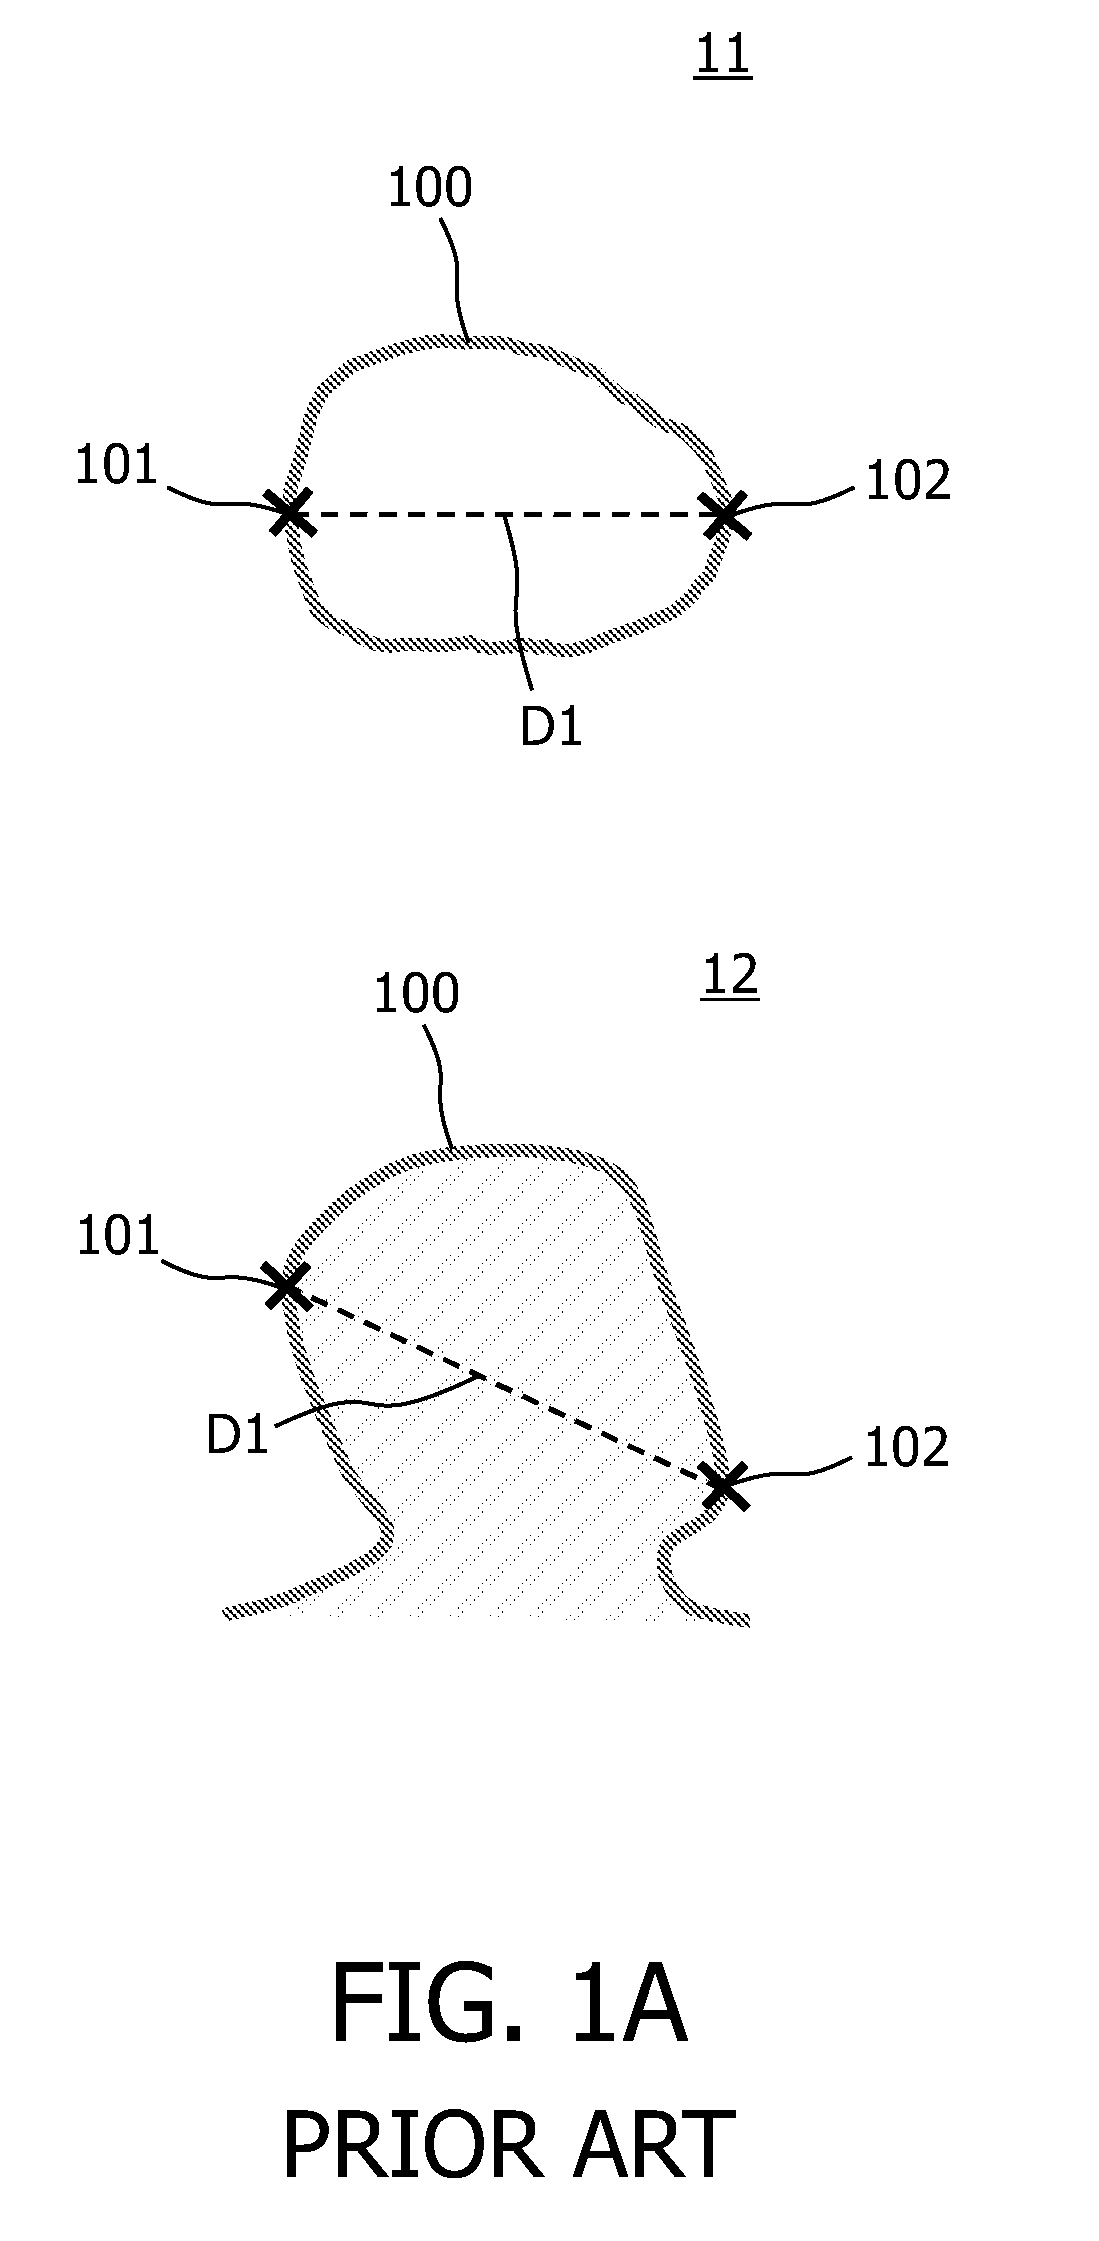 Caliper for measuring objects in an image